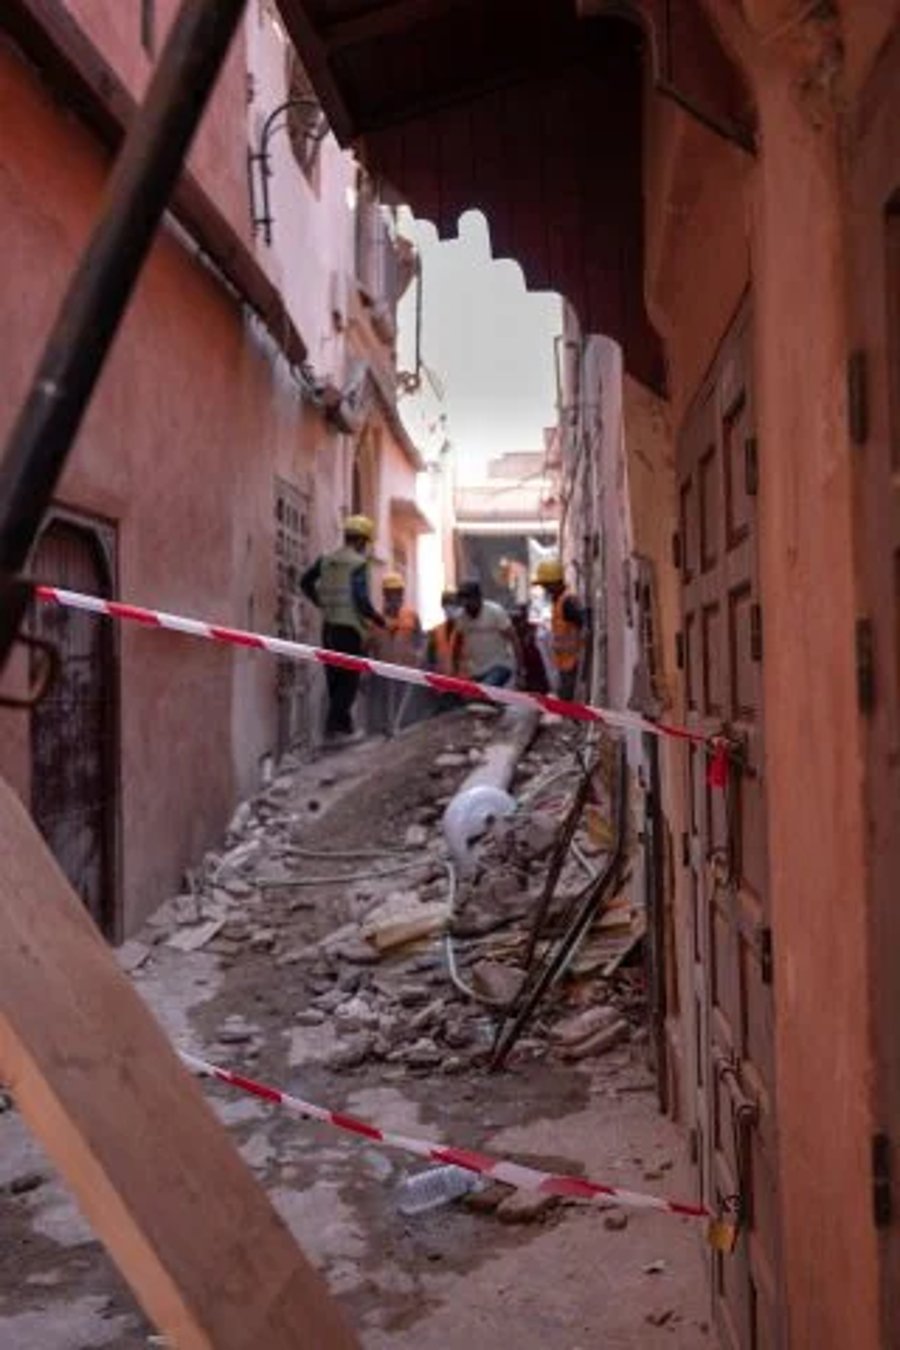 The destruction in Morocco